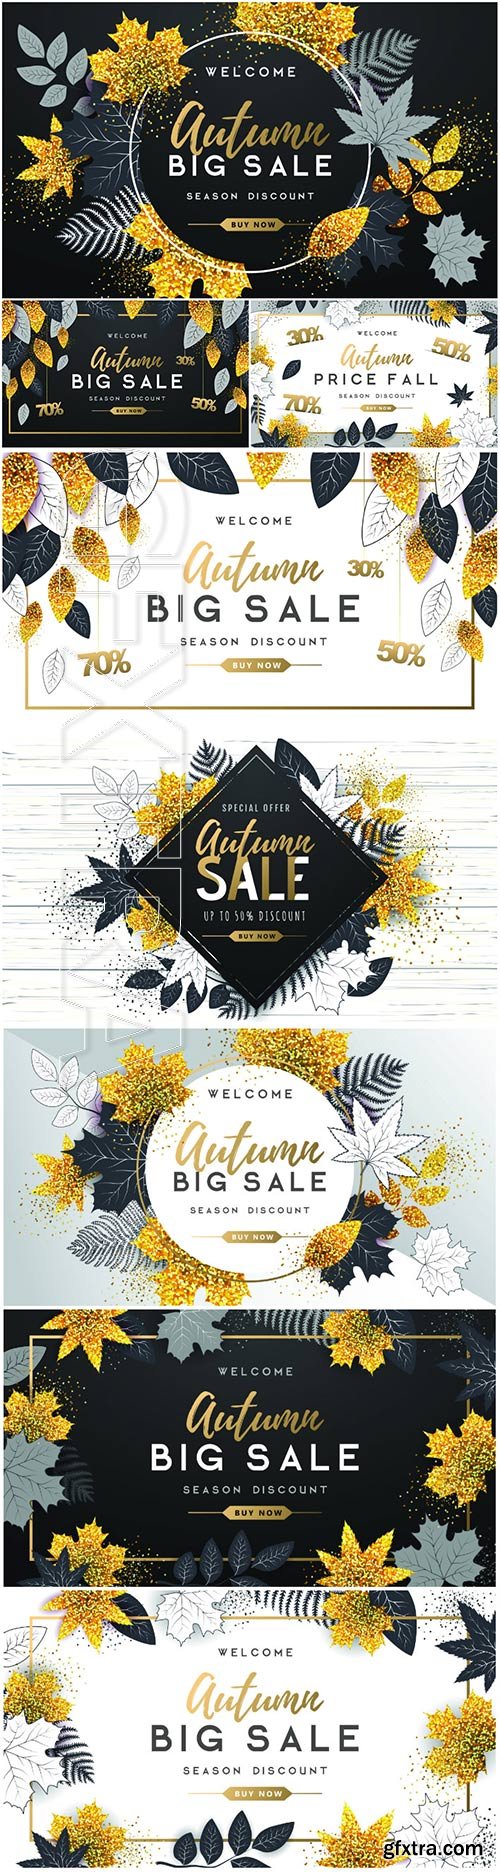 Autumn big sale poster with golden and black autumn leaves